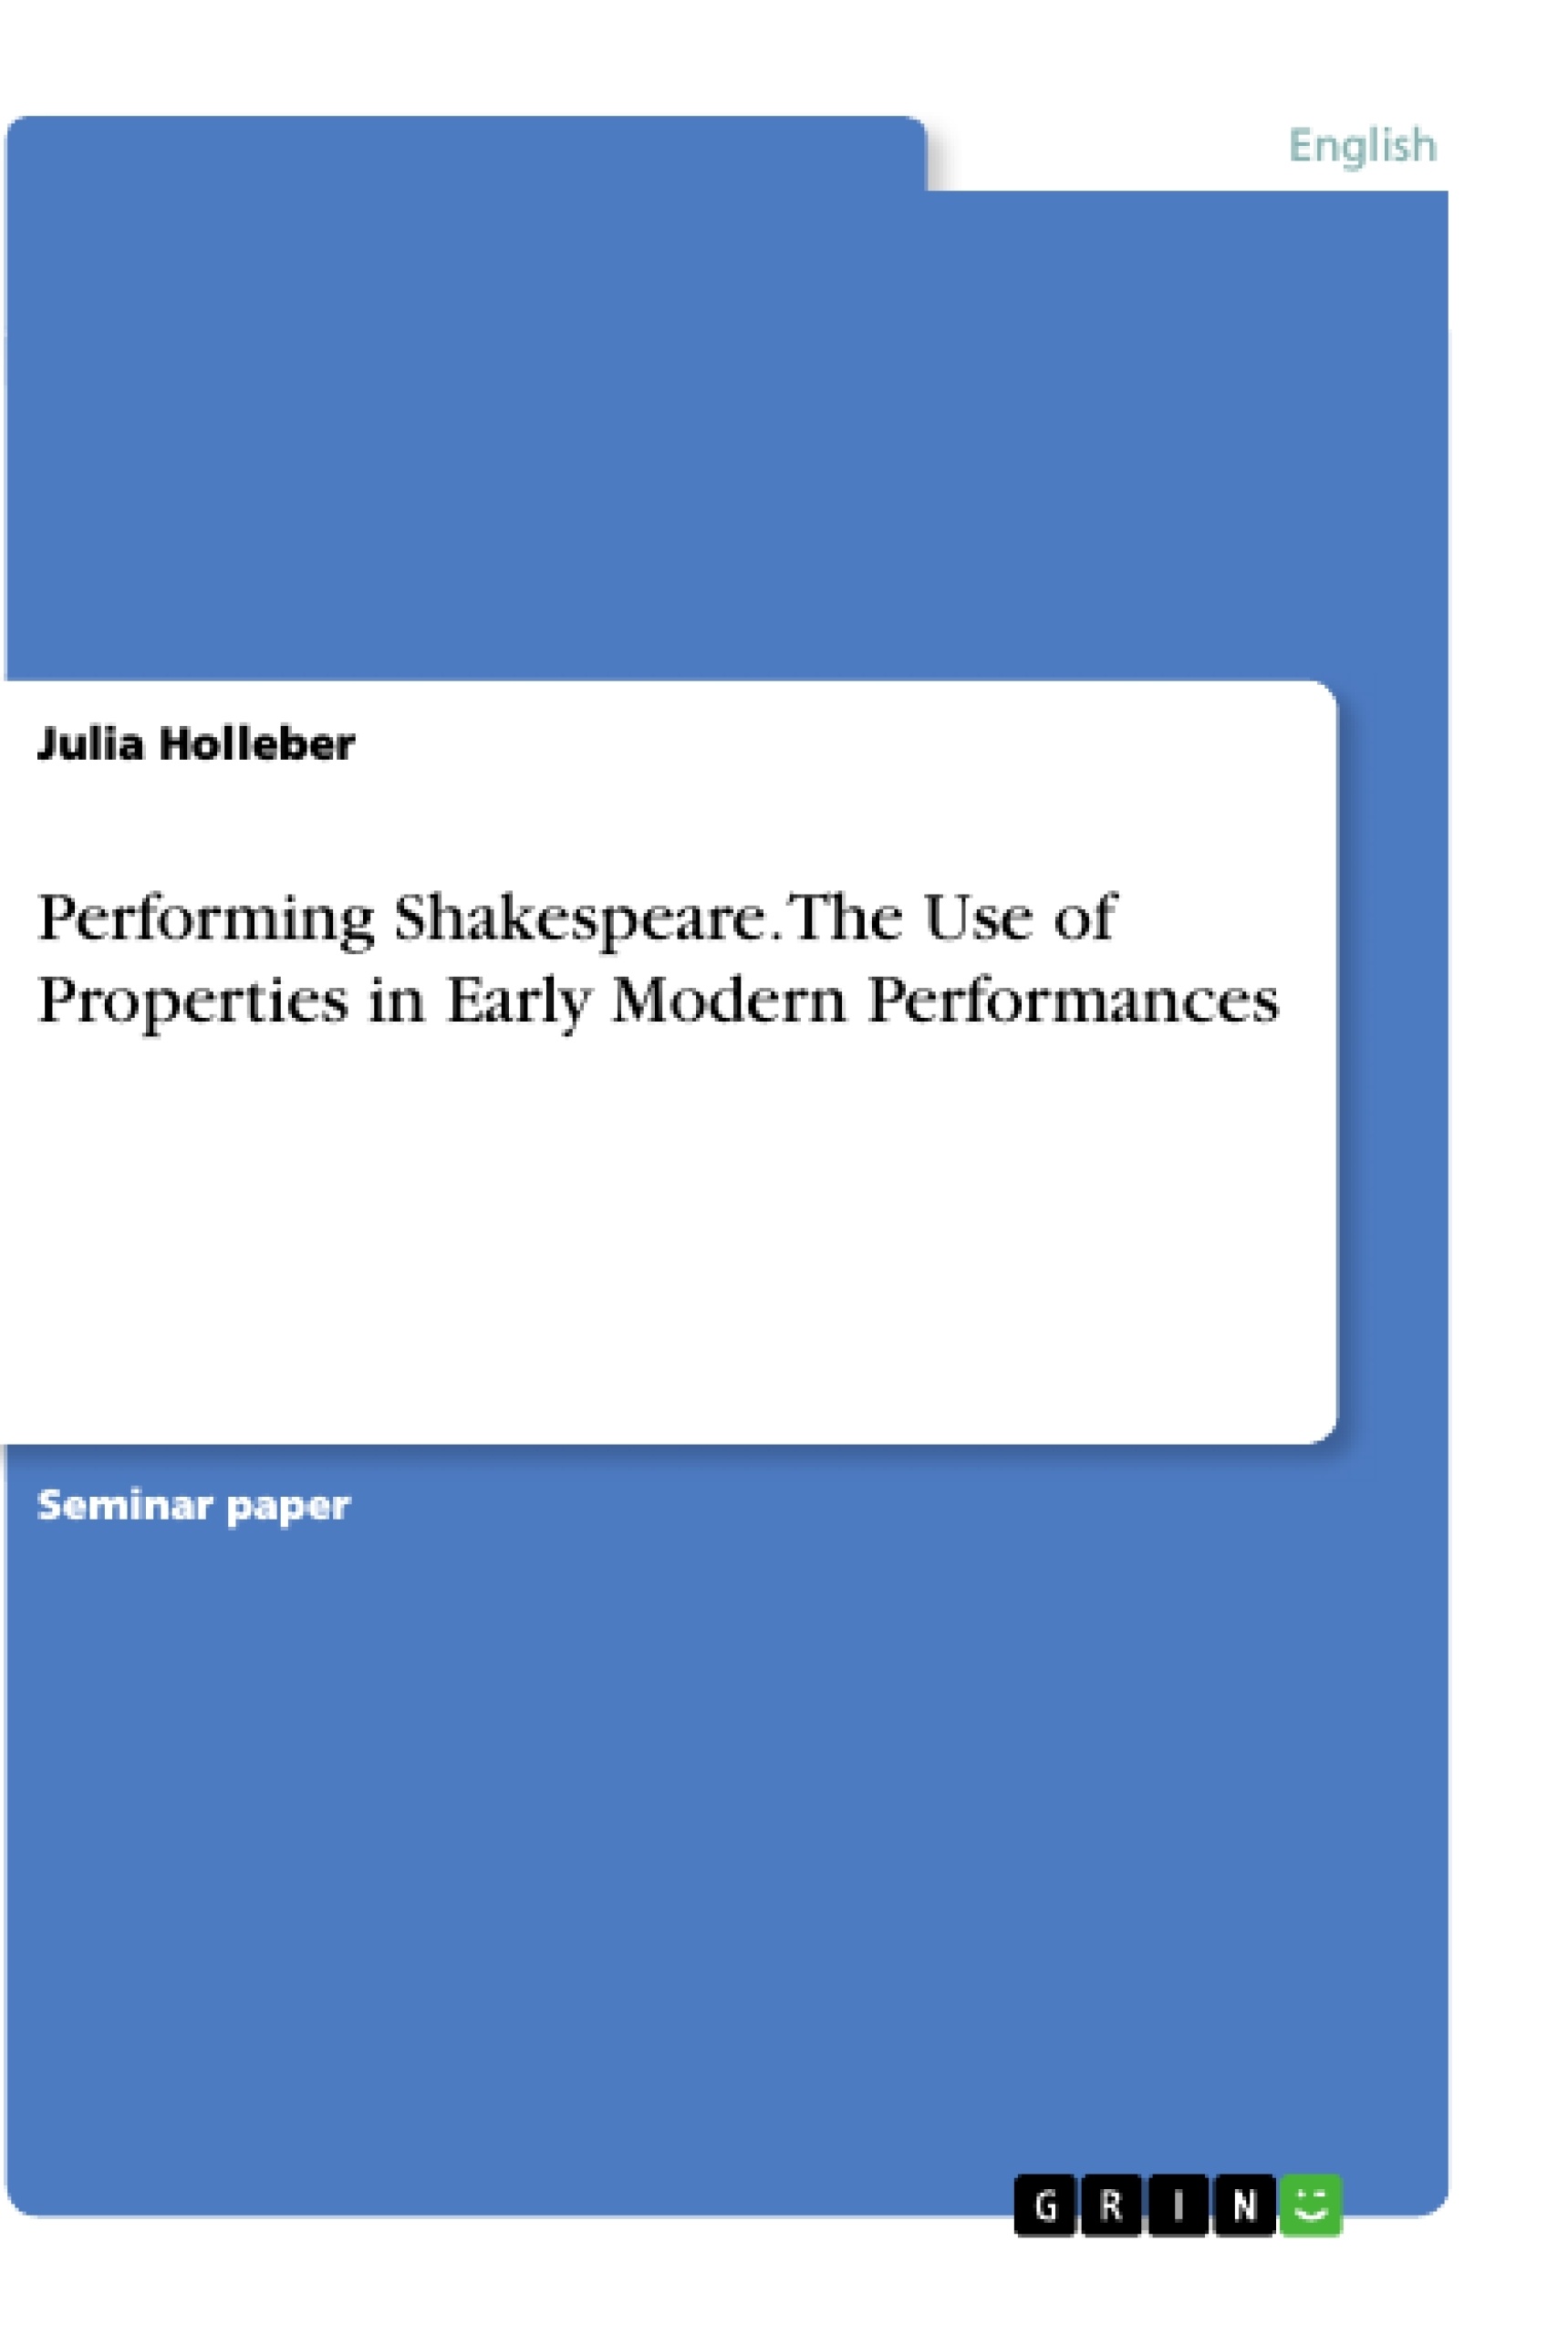 Titel: Performing Shakespeare. The Use of Properties in Early Modern Performances